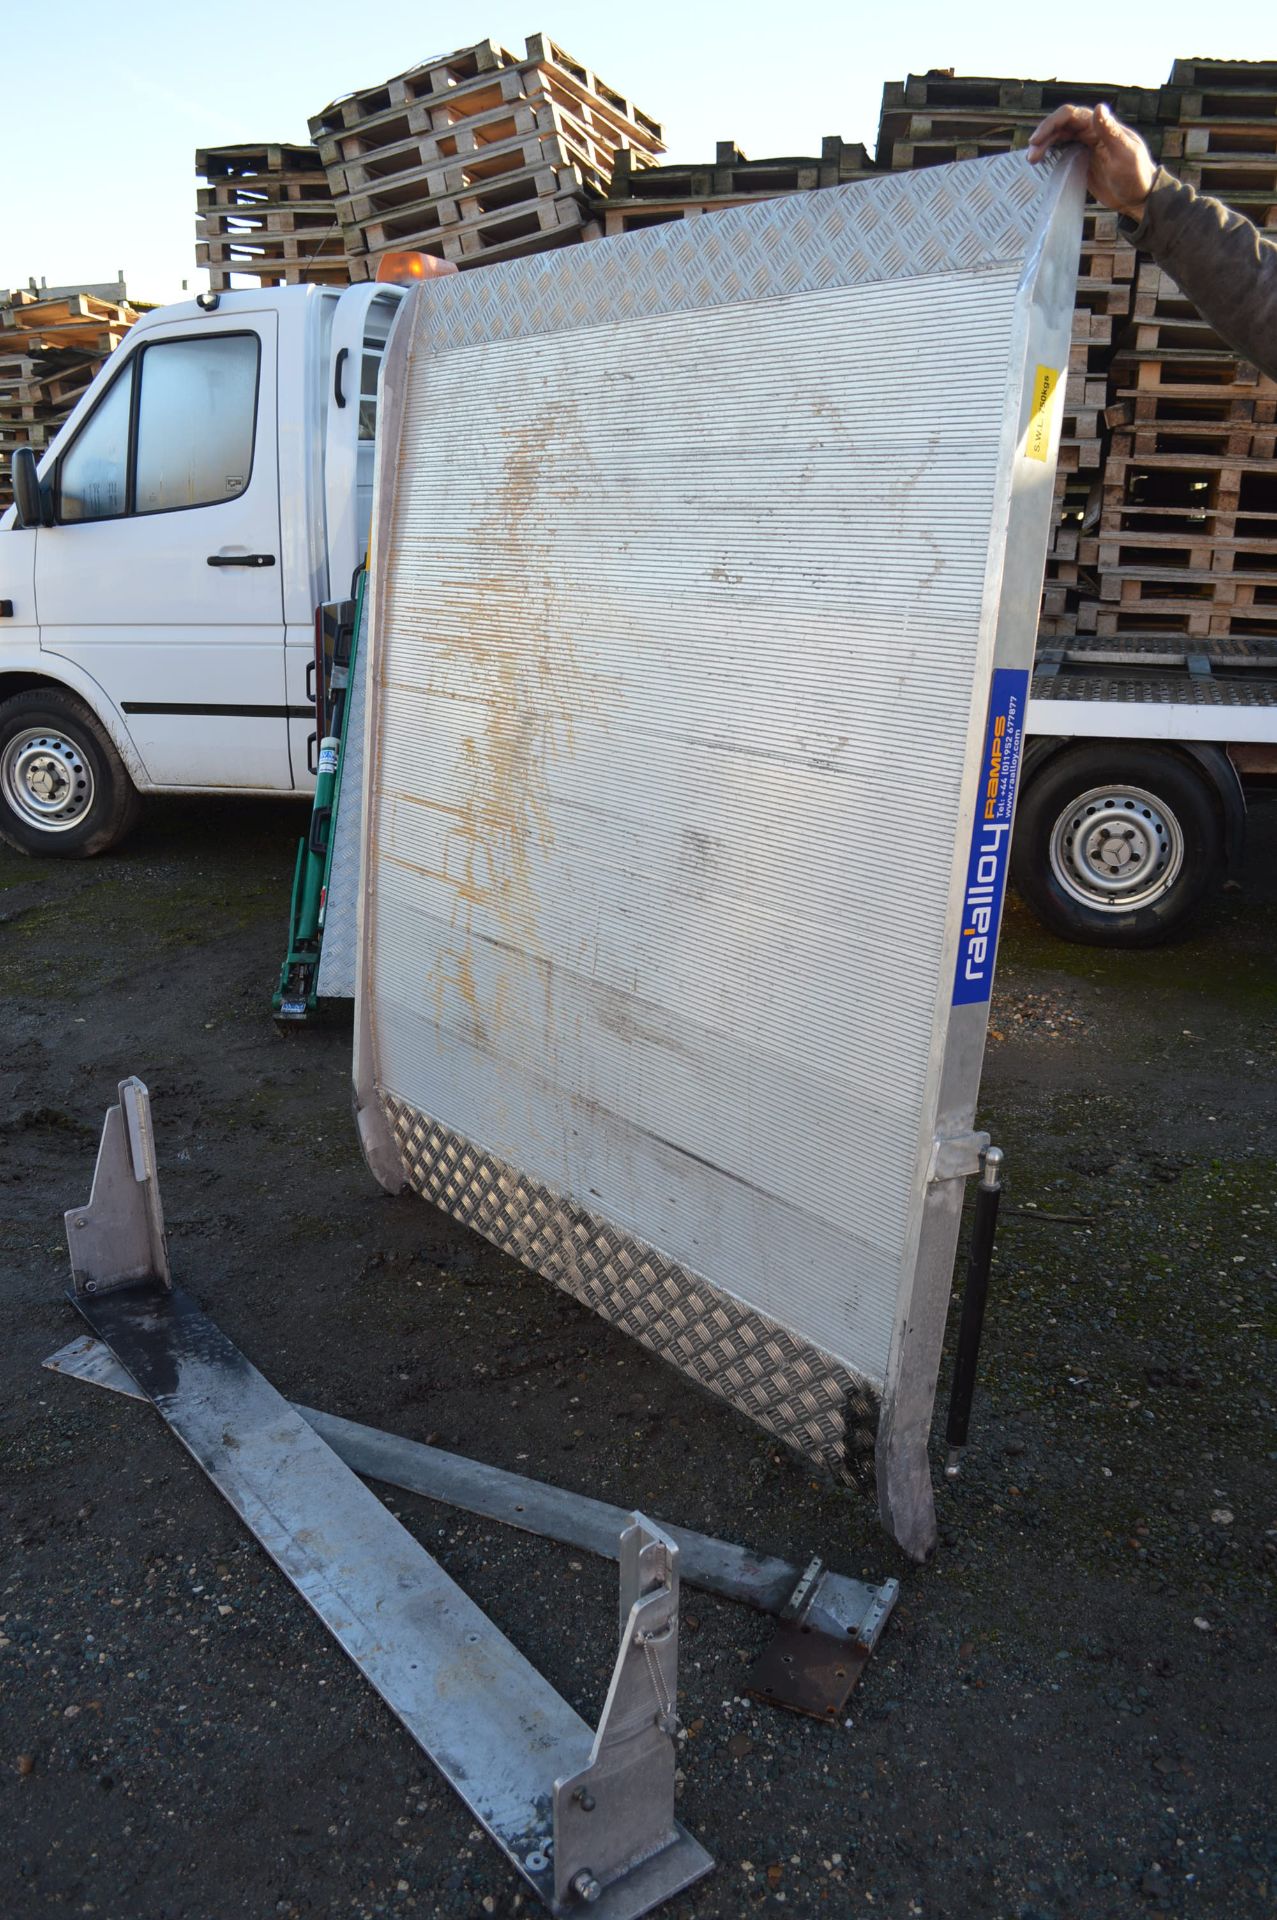 ALUMINIUM MOTORCYCLE TRANSPORTER DISABLED/MOTORCYCLE RAMP *NO VAT*   MASS: 750KG   COLLECTION